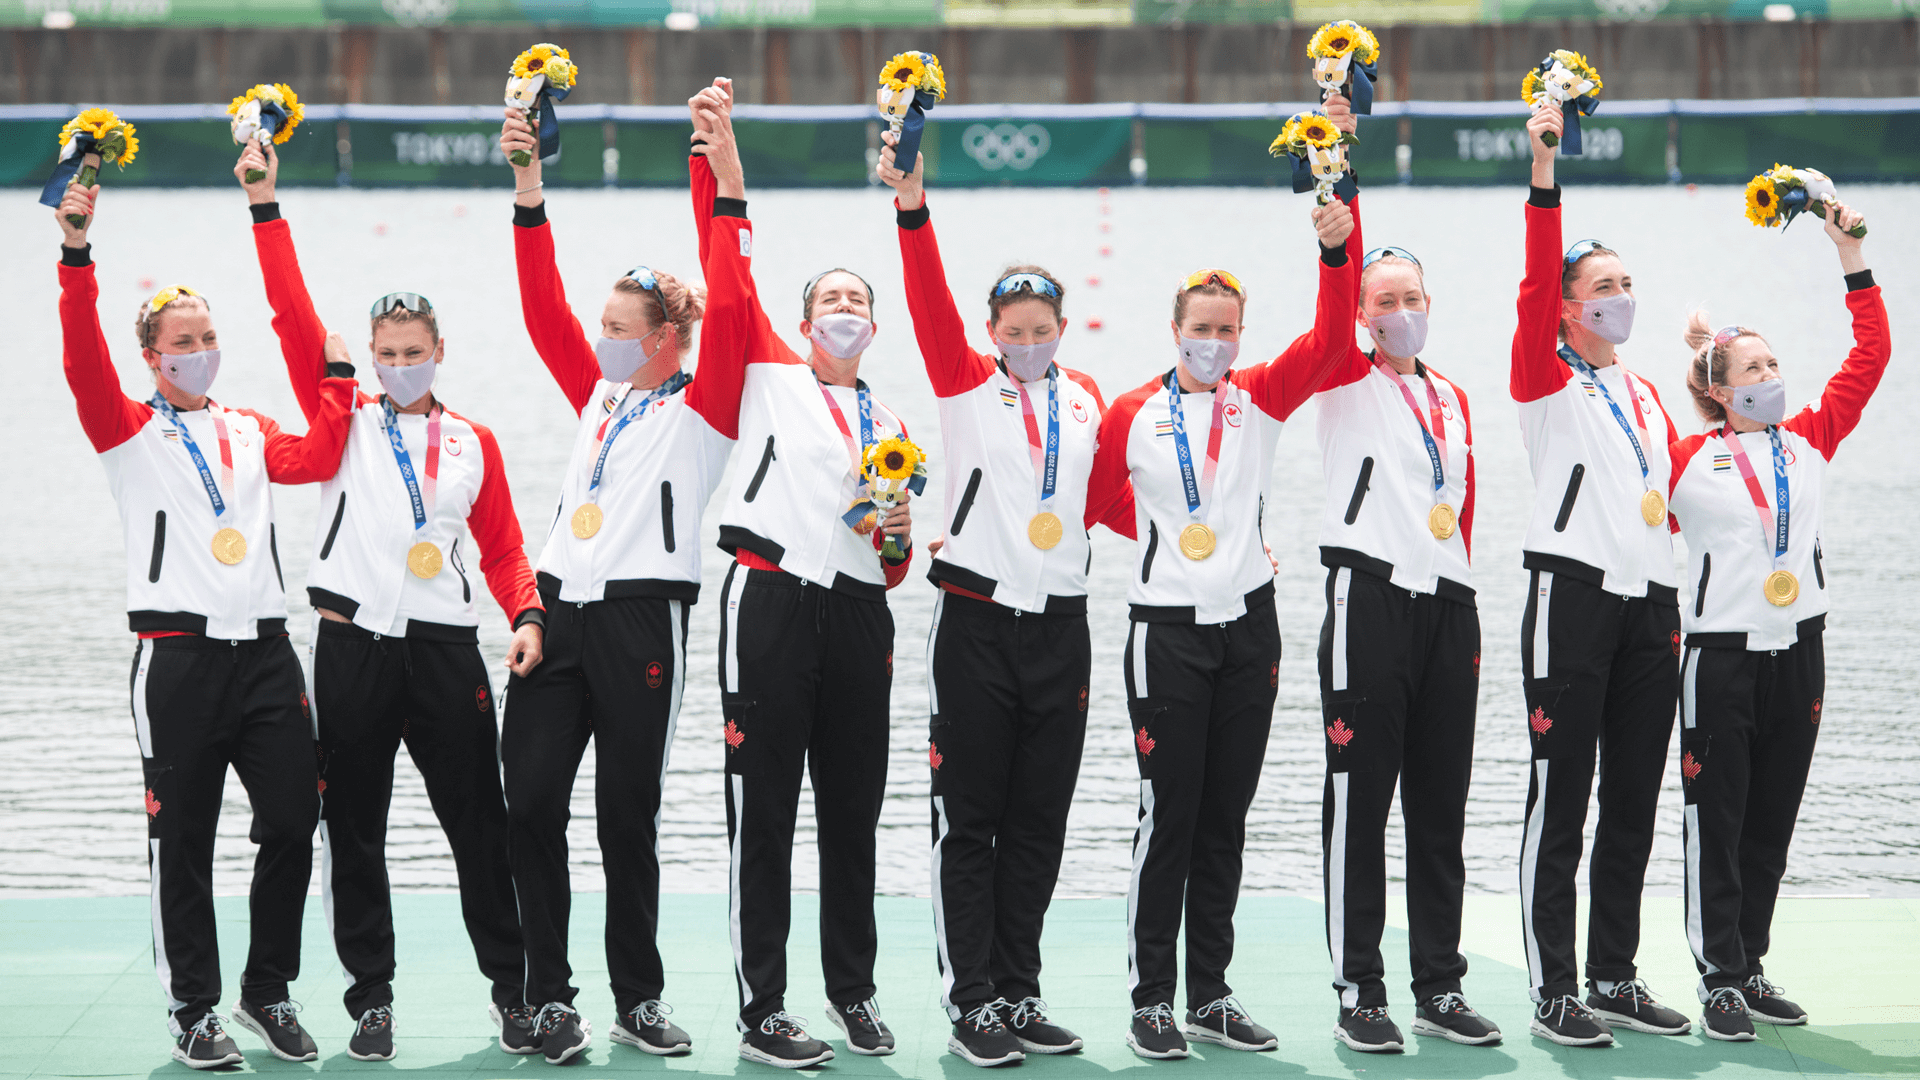 Canadian women's eight rowing team with their gold medals and holding flowers